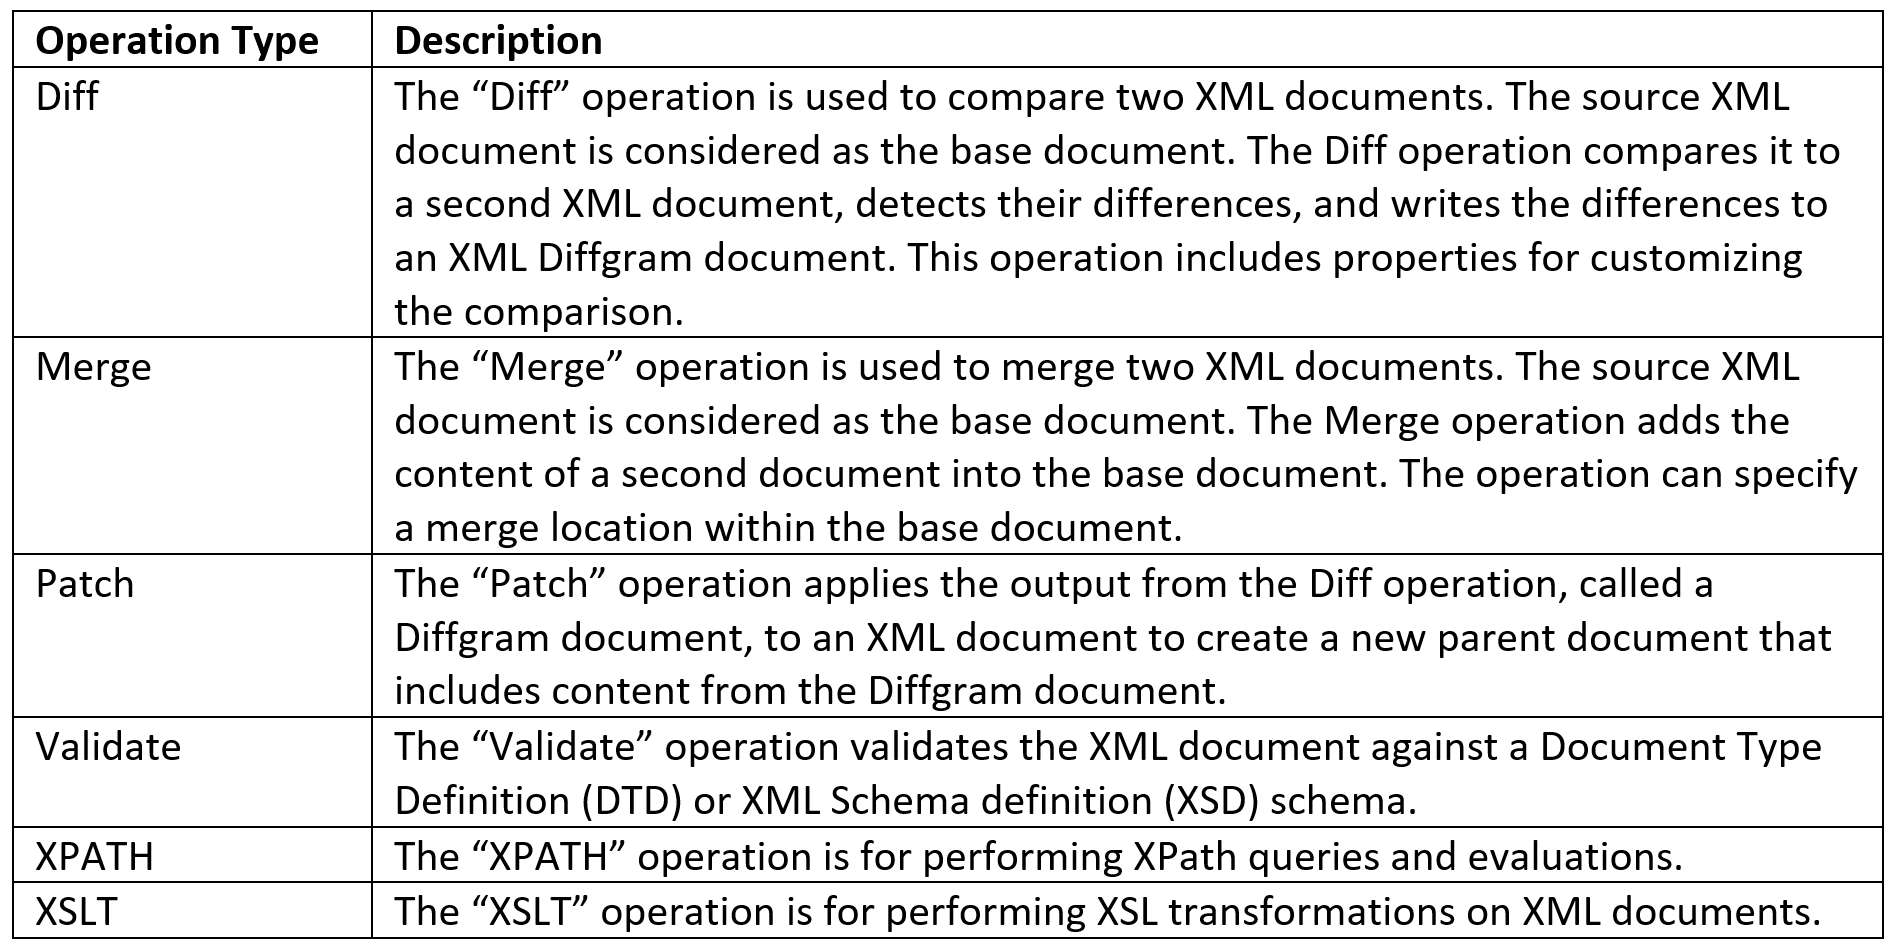 Available operation types in the SSIS XML task